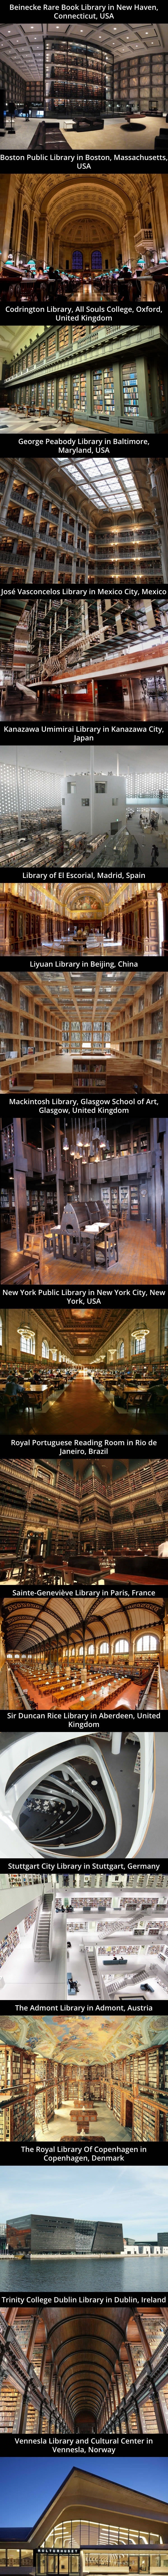 Grand and gorgeous libraries